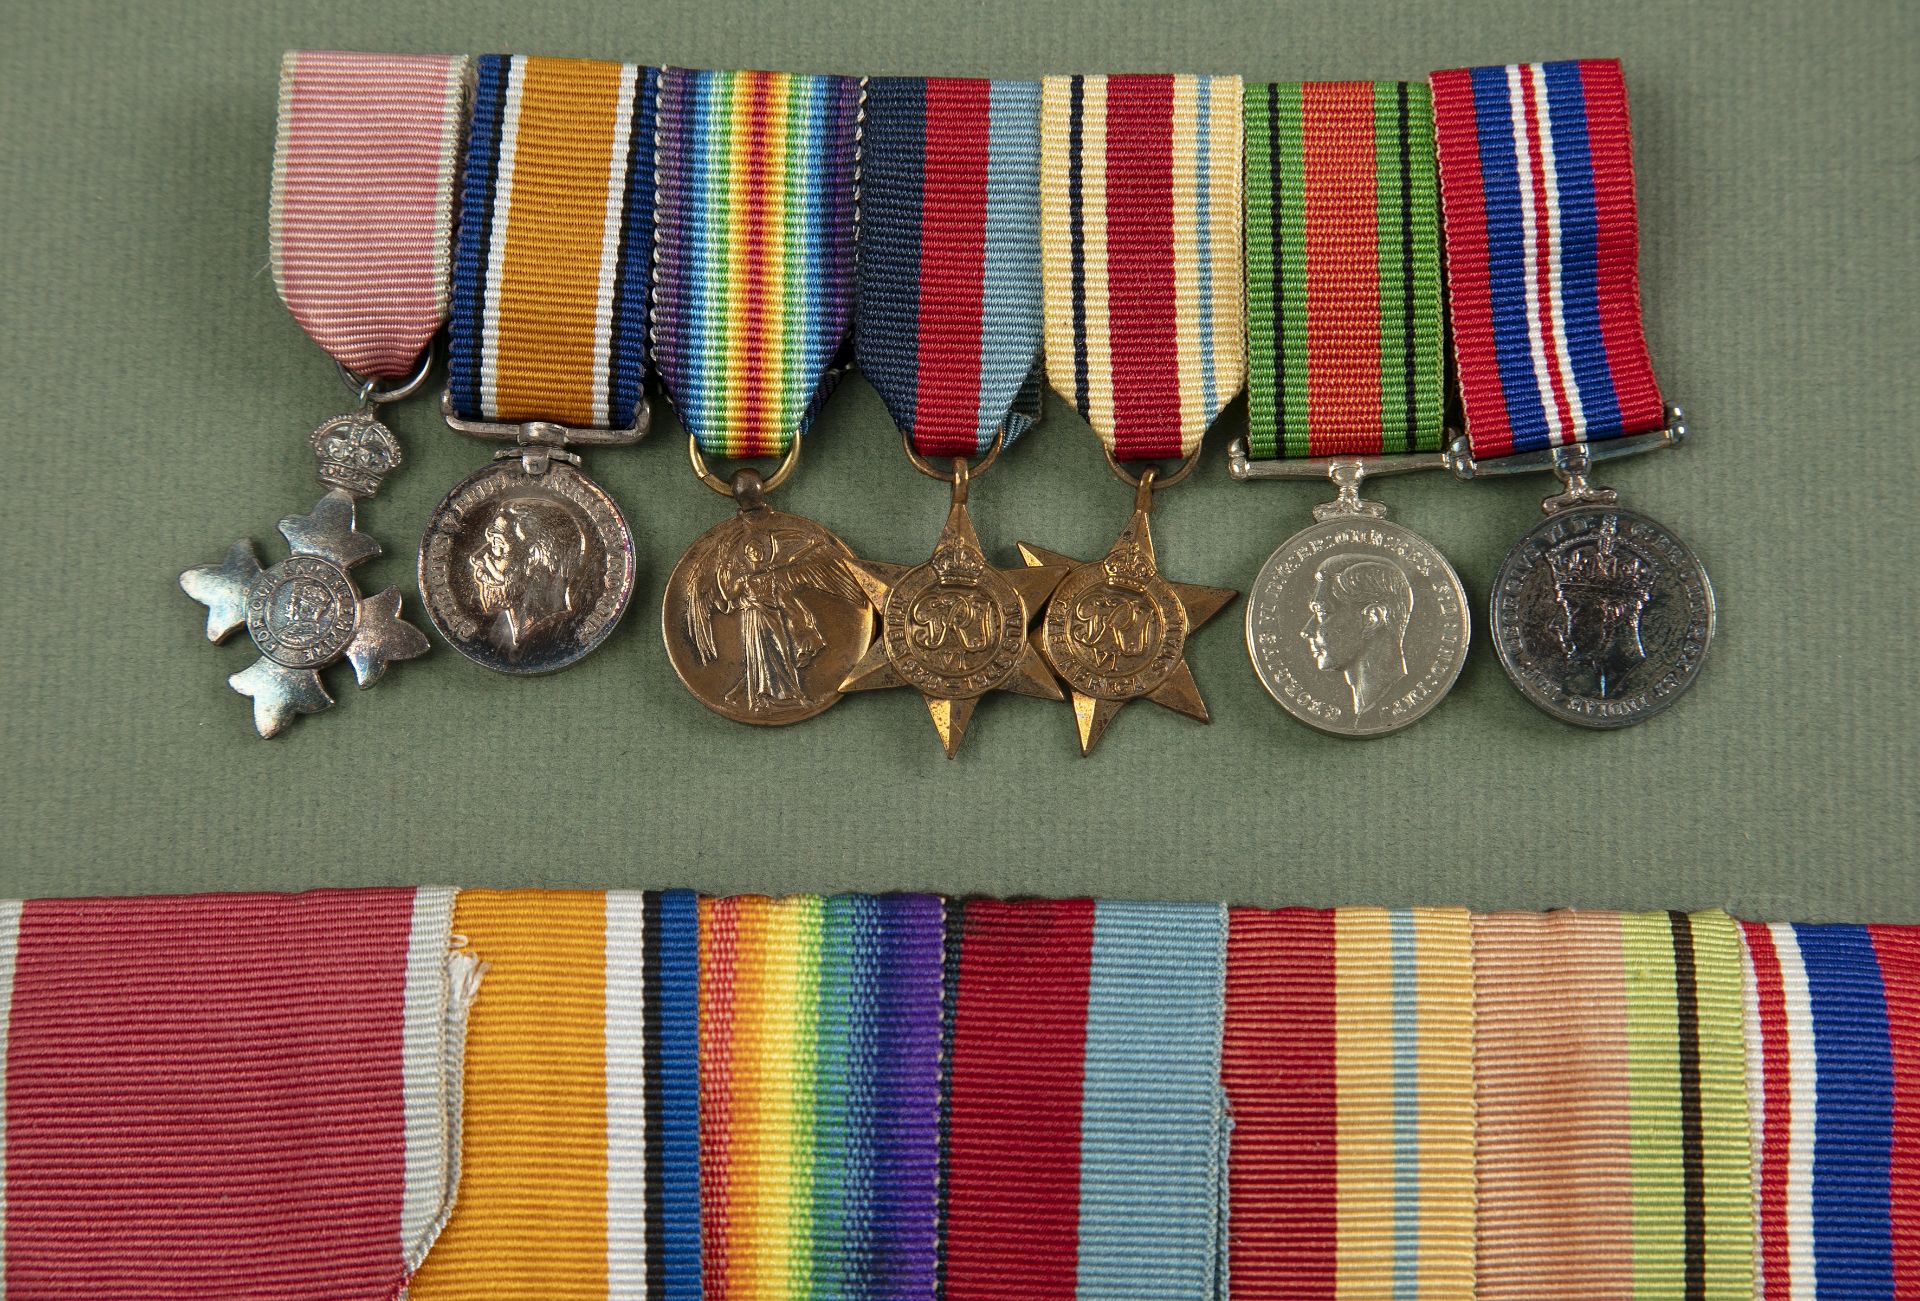 WWI and WWII campaign medals awarded to Captain R Ingham to include an MBE and miniatures, - Image 3 of 4